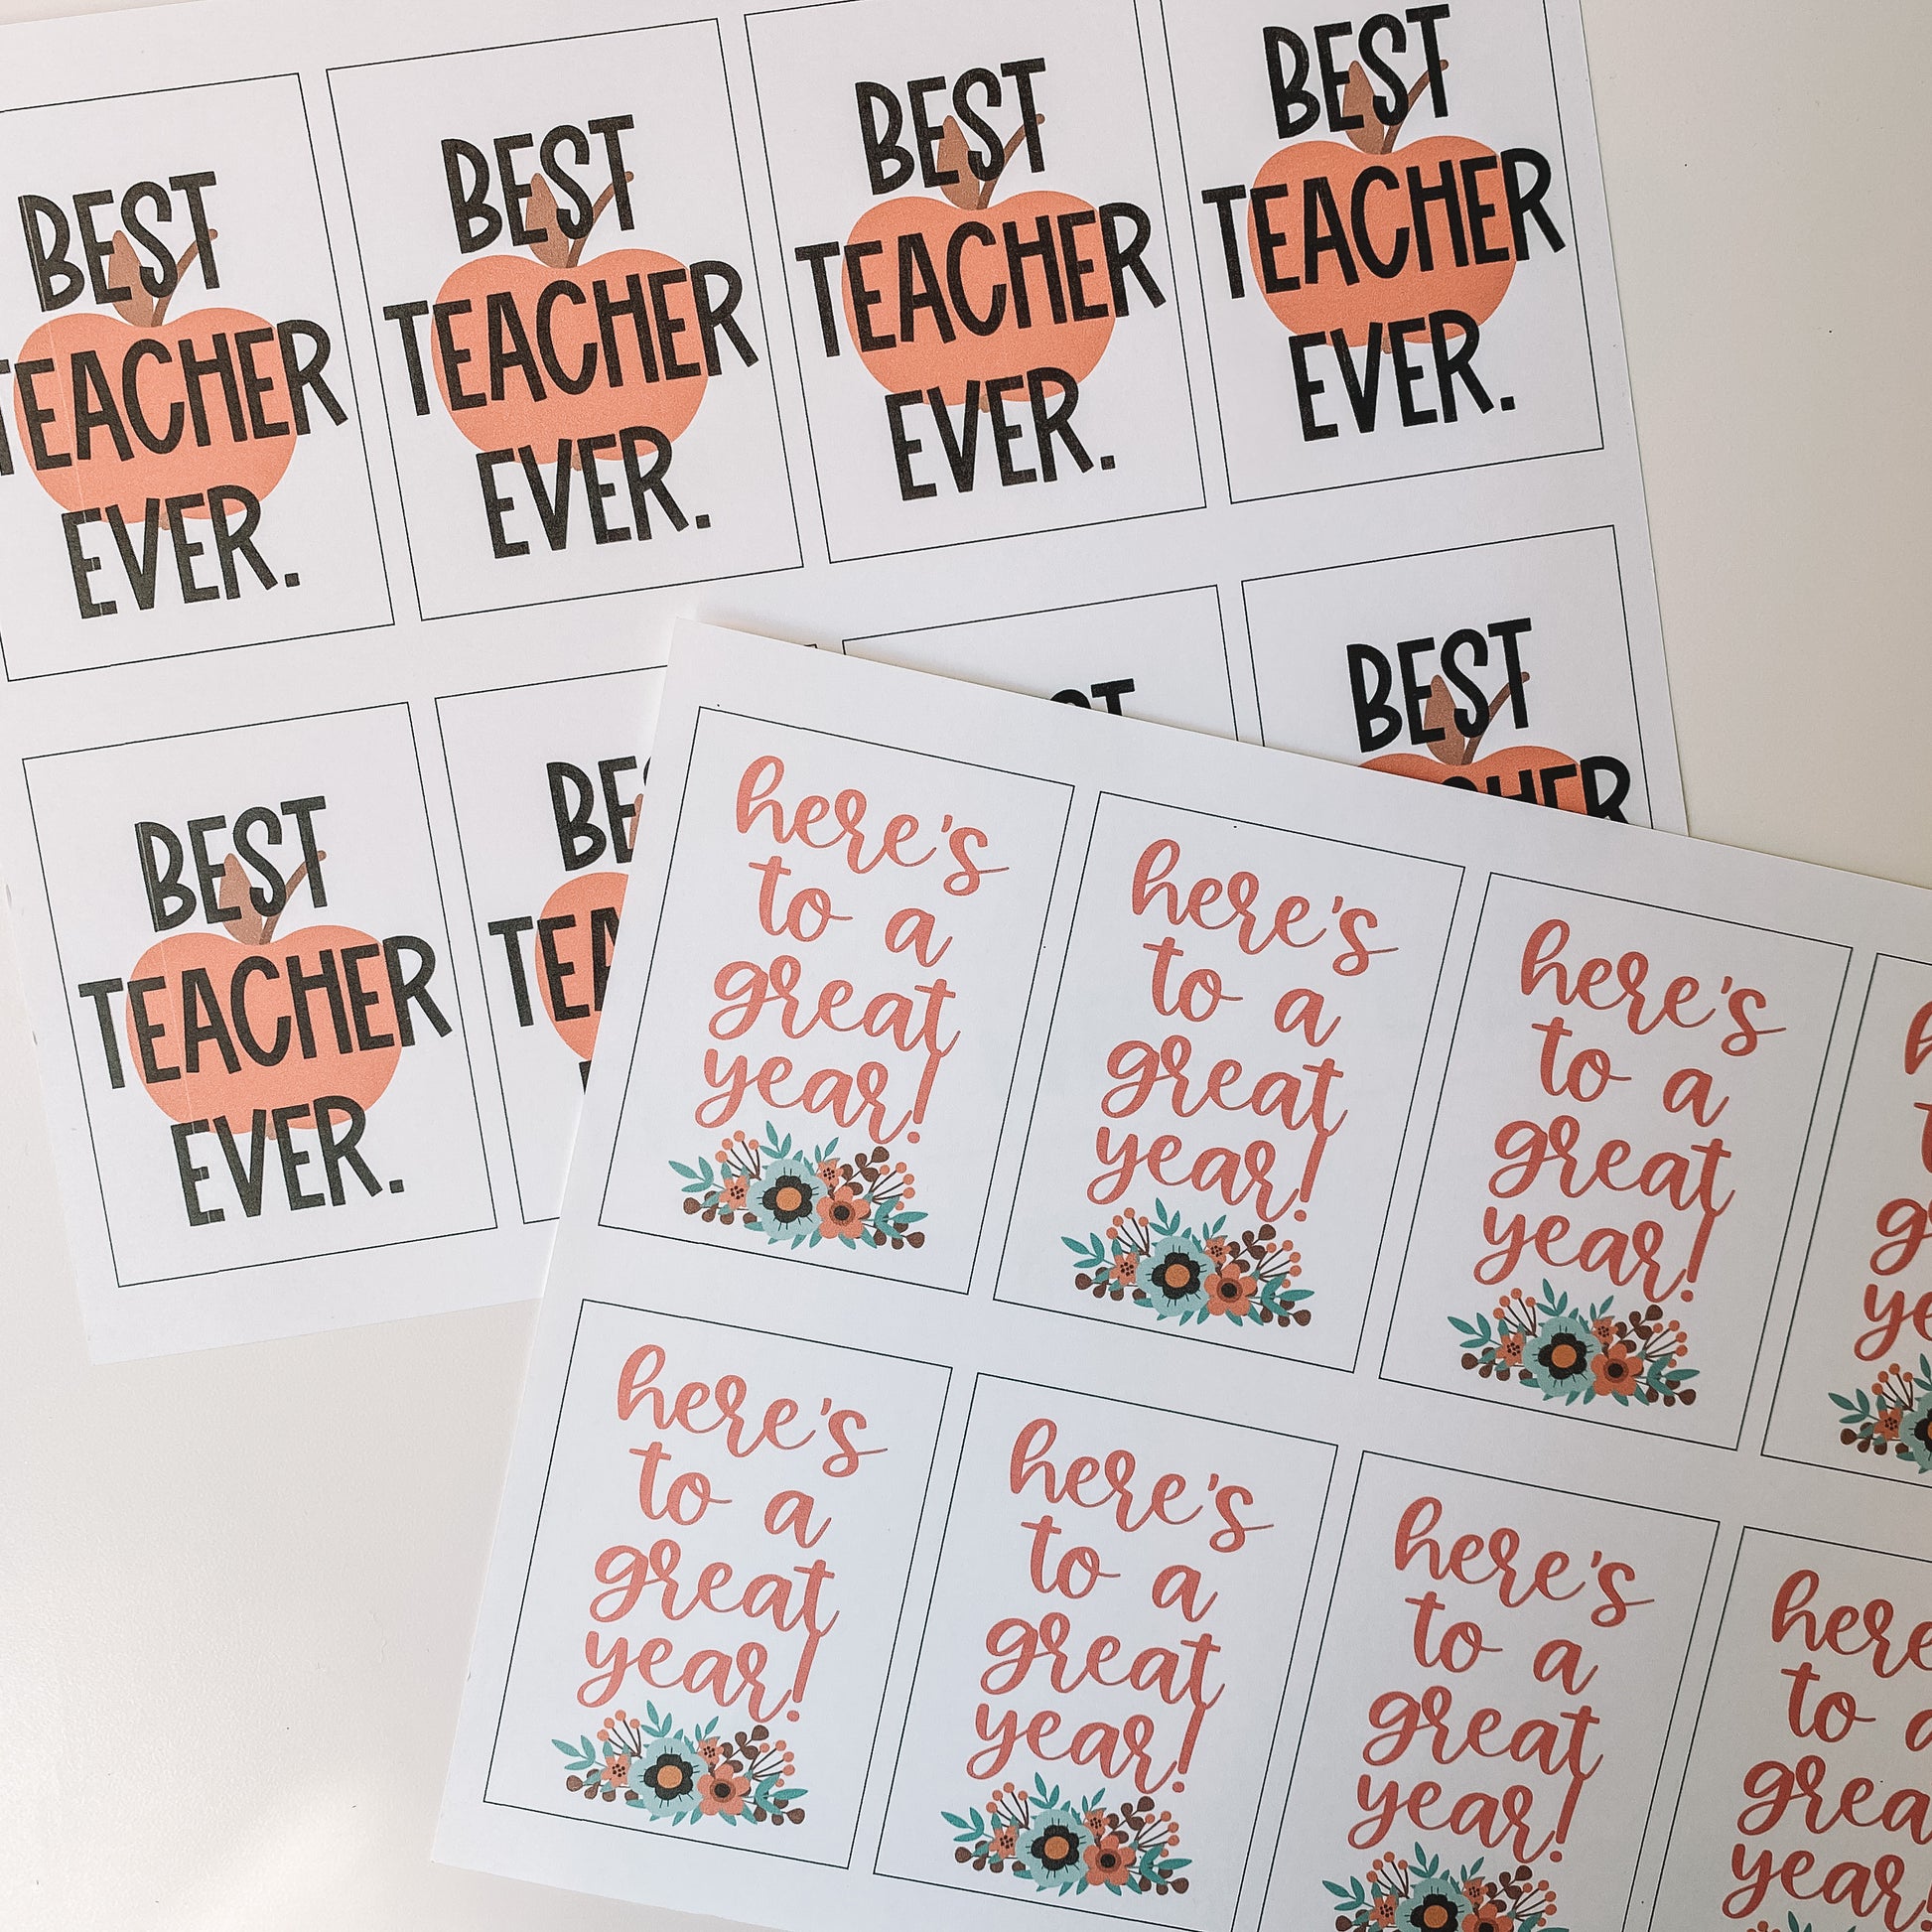 Best teacher ever and here is to a great year gift tags displayed on an 8.5 by 11 inch paper before cutting. There are eight of each tag printed on each page.